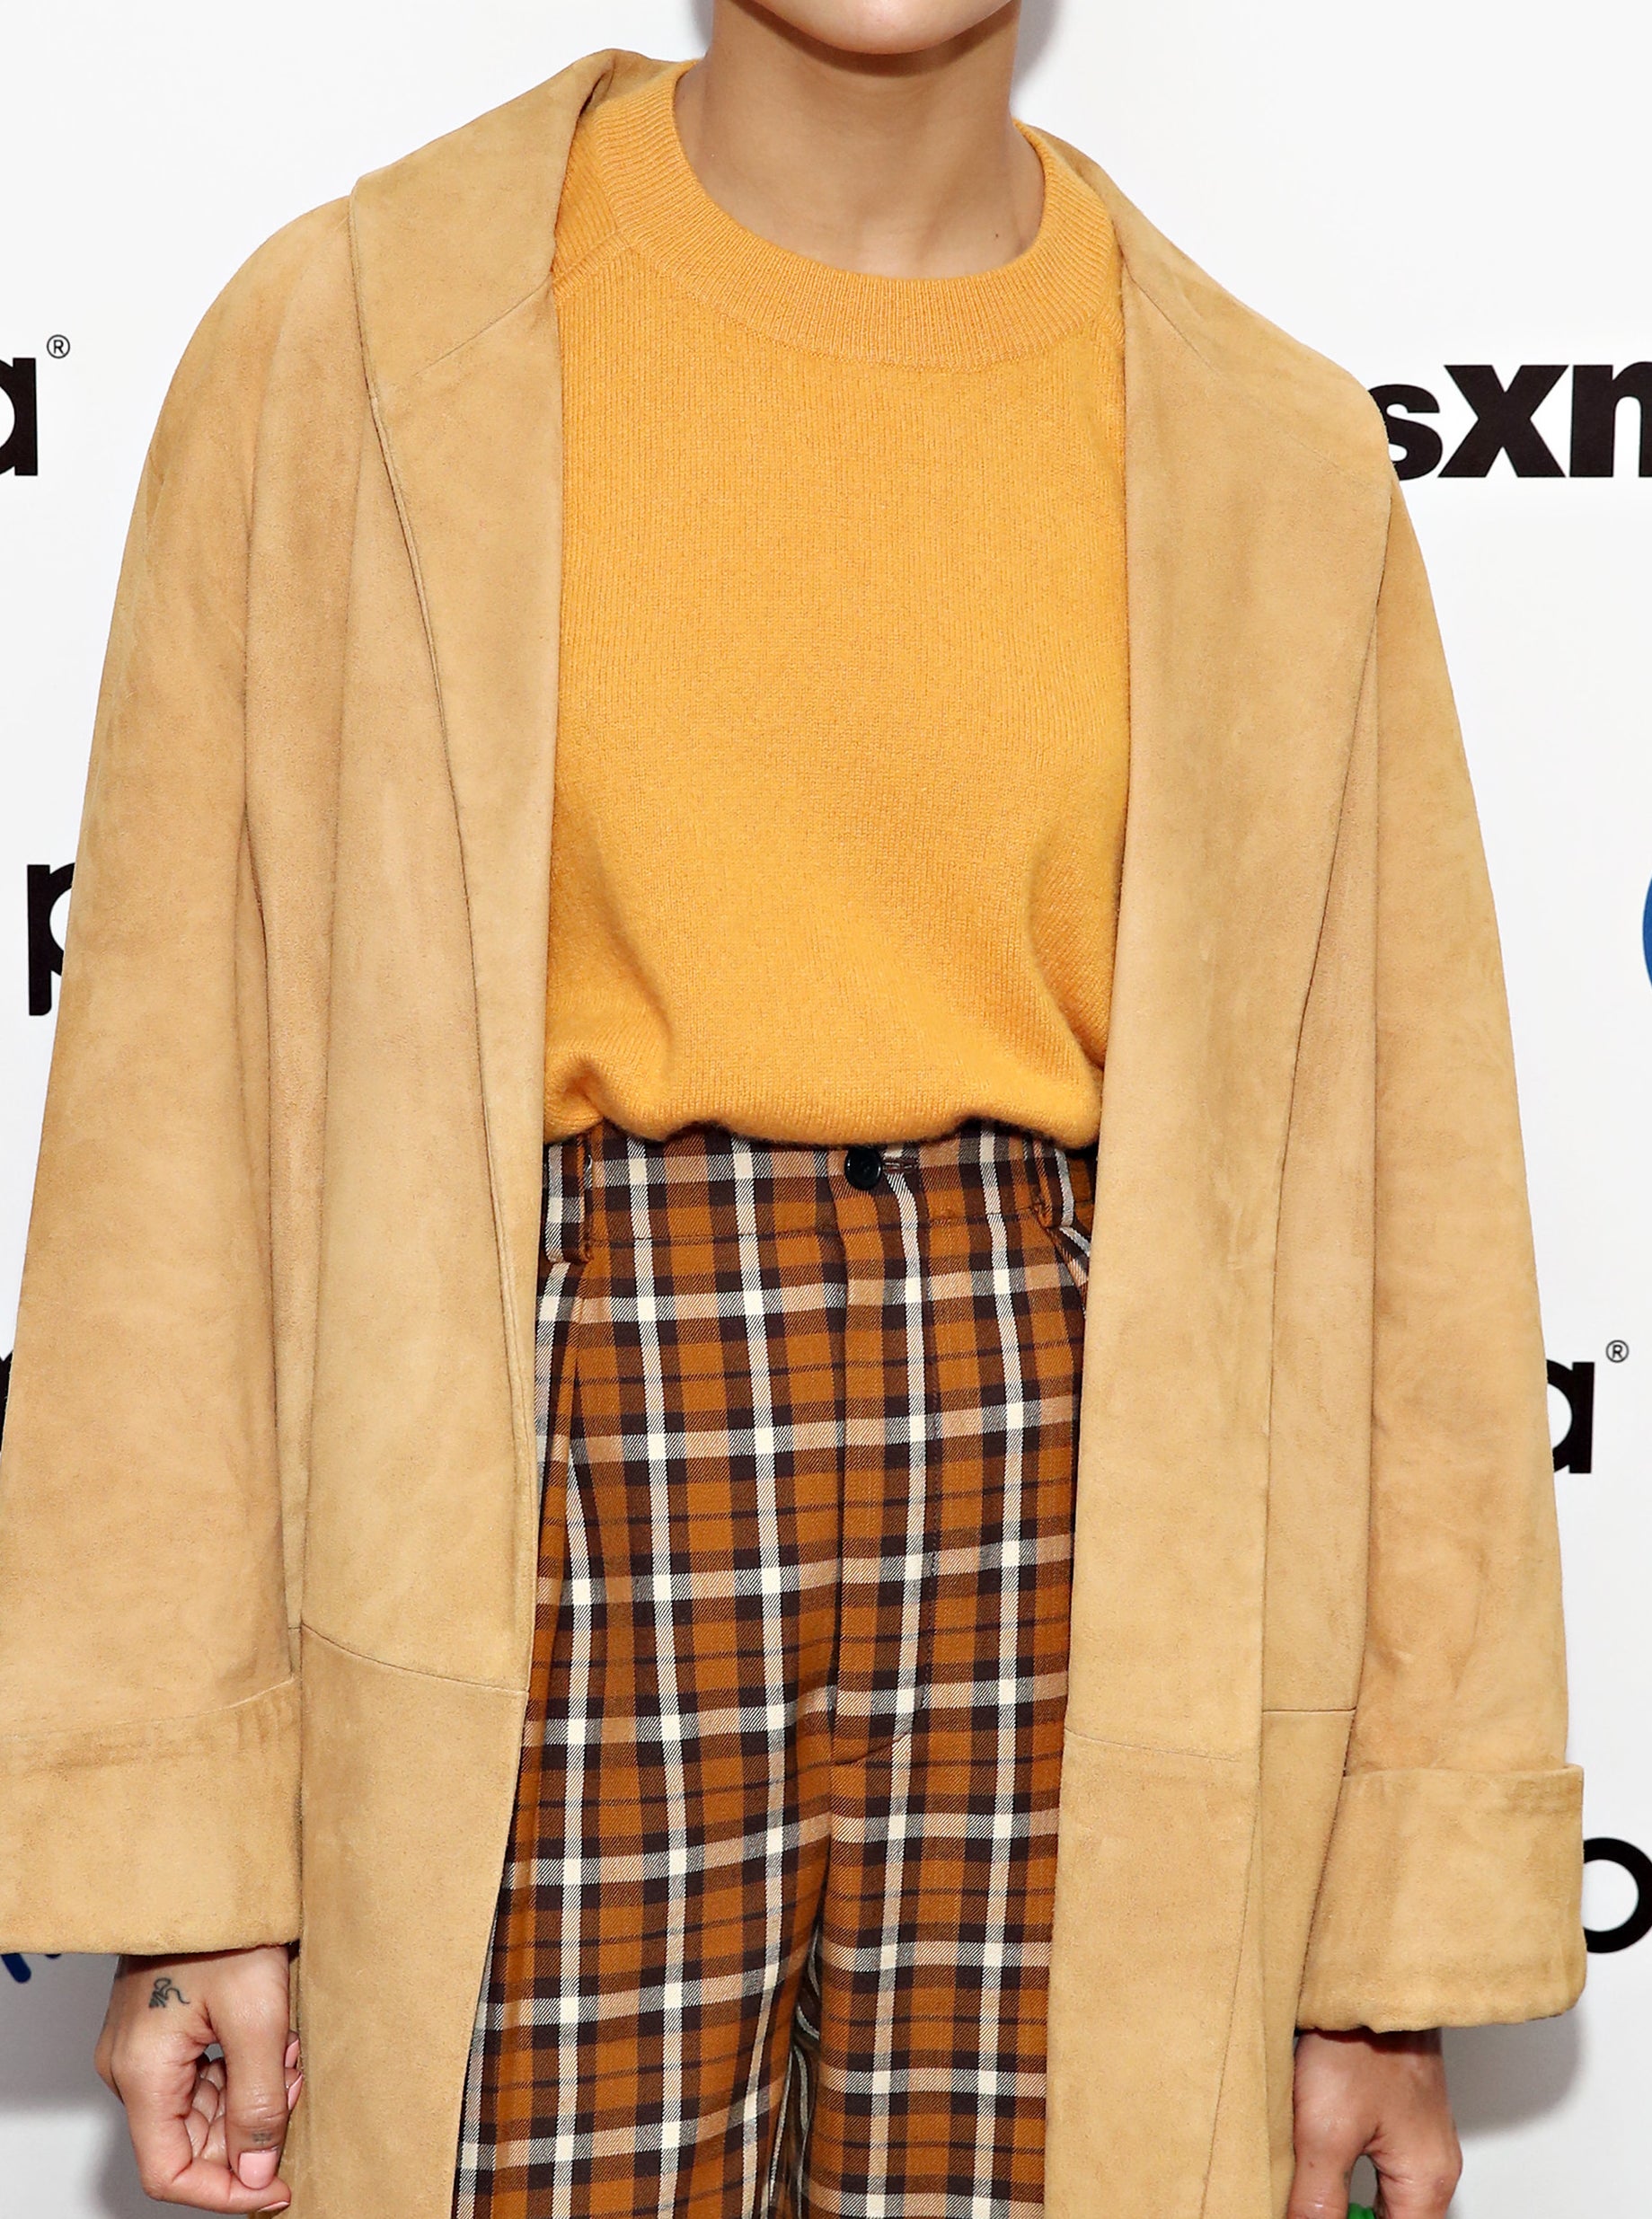 Zoe Kravitz at a red carpet event, with a pixie cut, wearing an orange sweater, plaid bands, and a coat